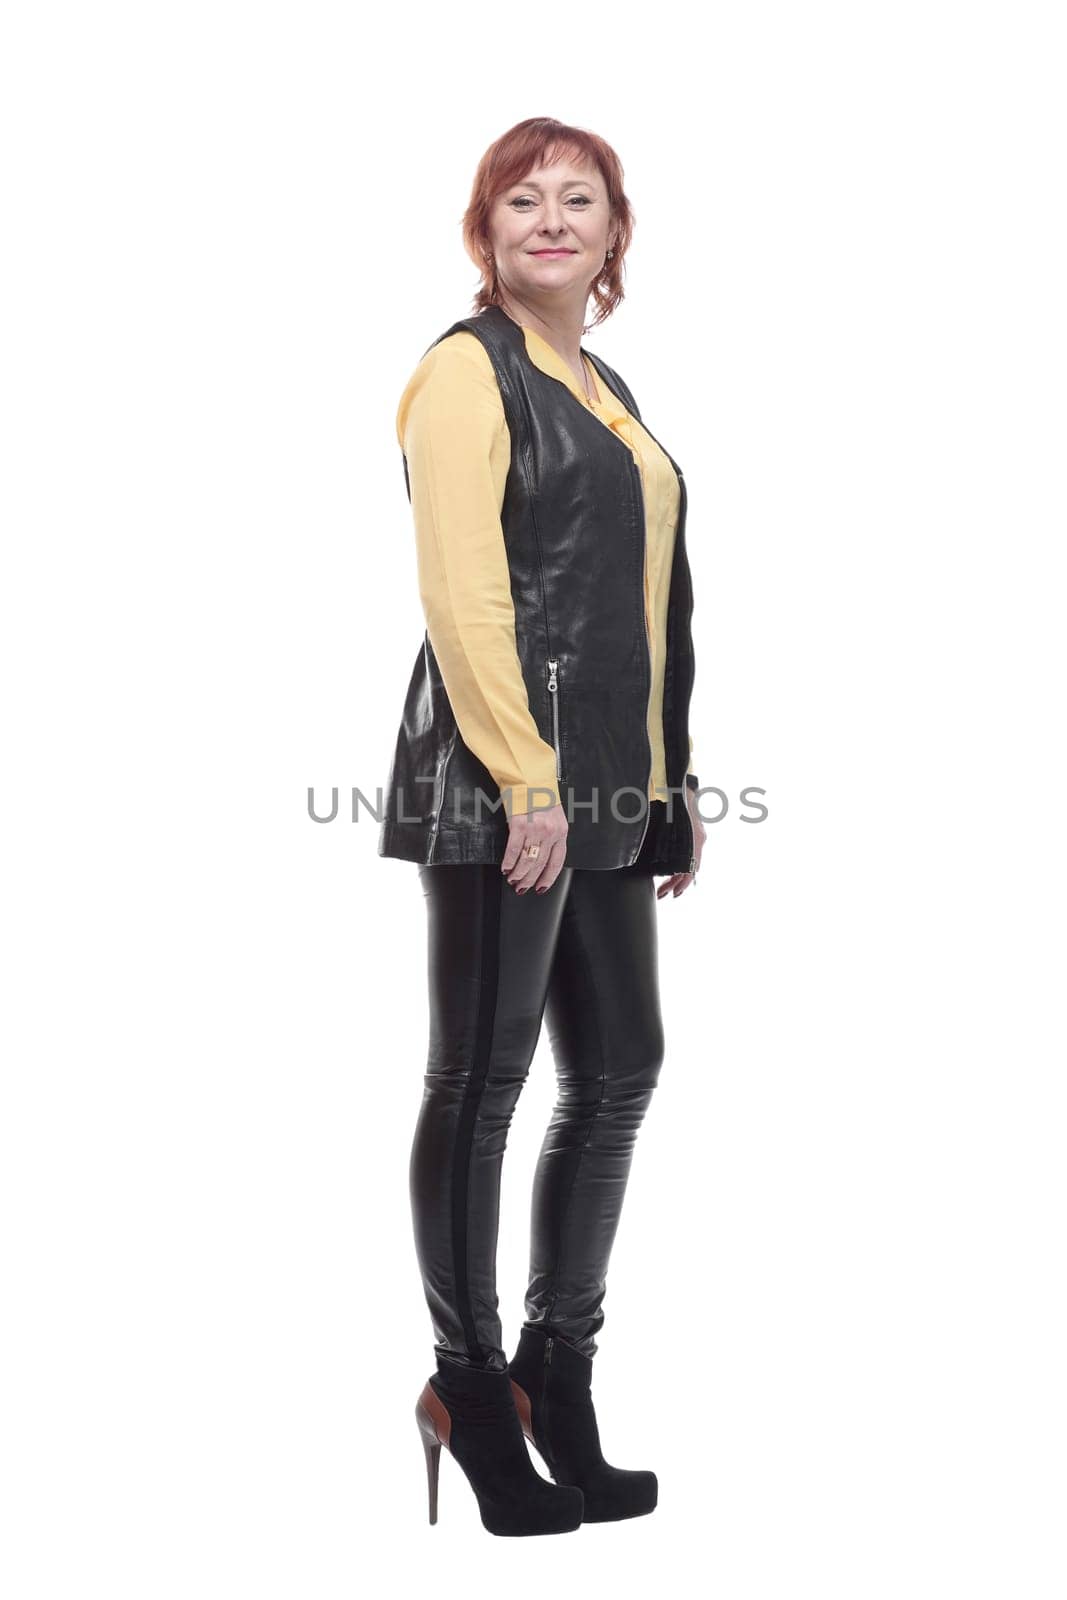 attractive mature woman in leather trousers and vest. by asdf